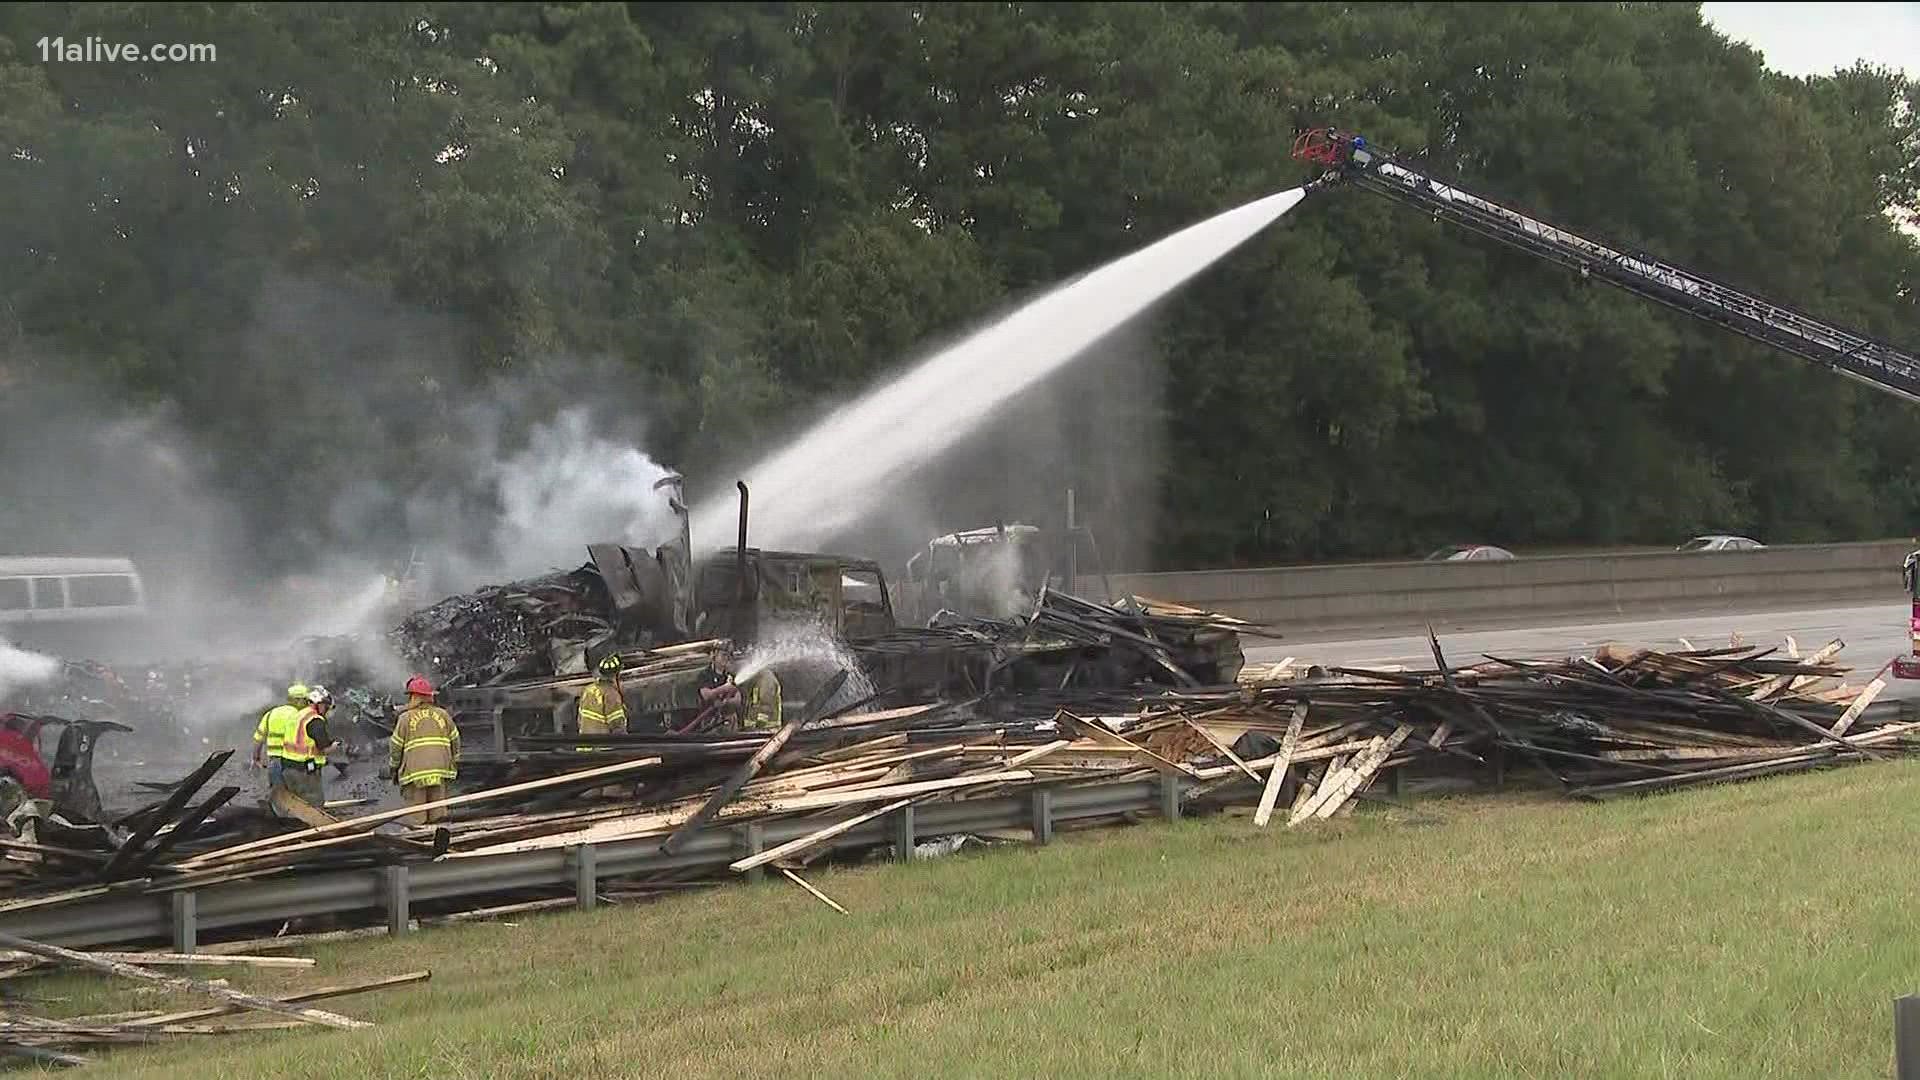 Authorities said the driver of one of the trucks was entering the interstate when it lost control.